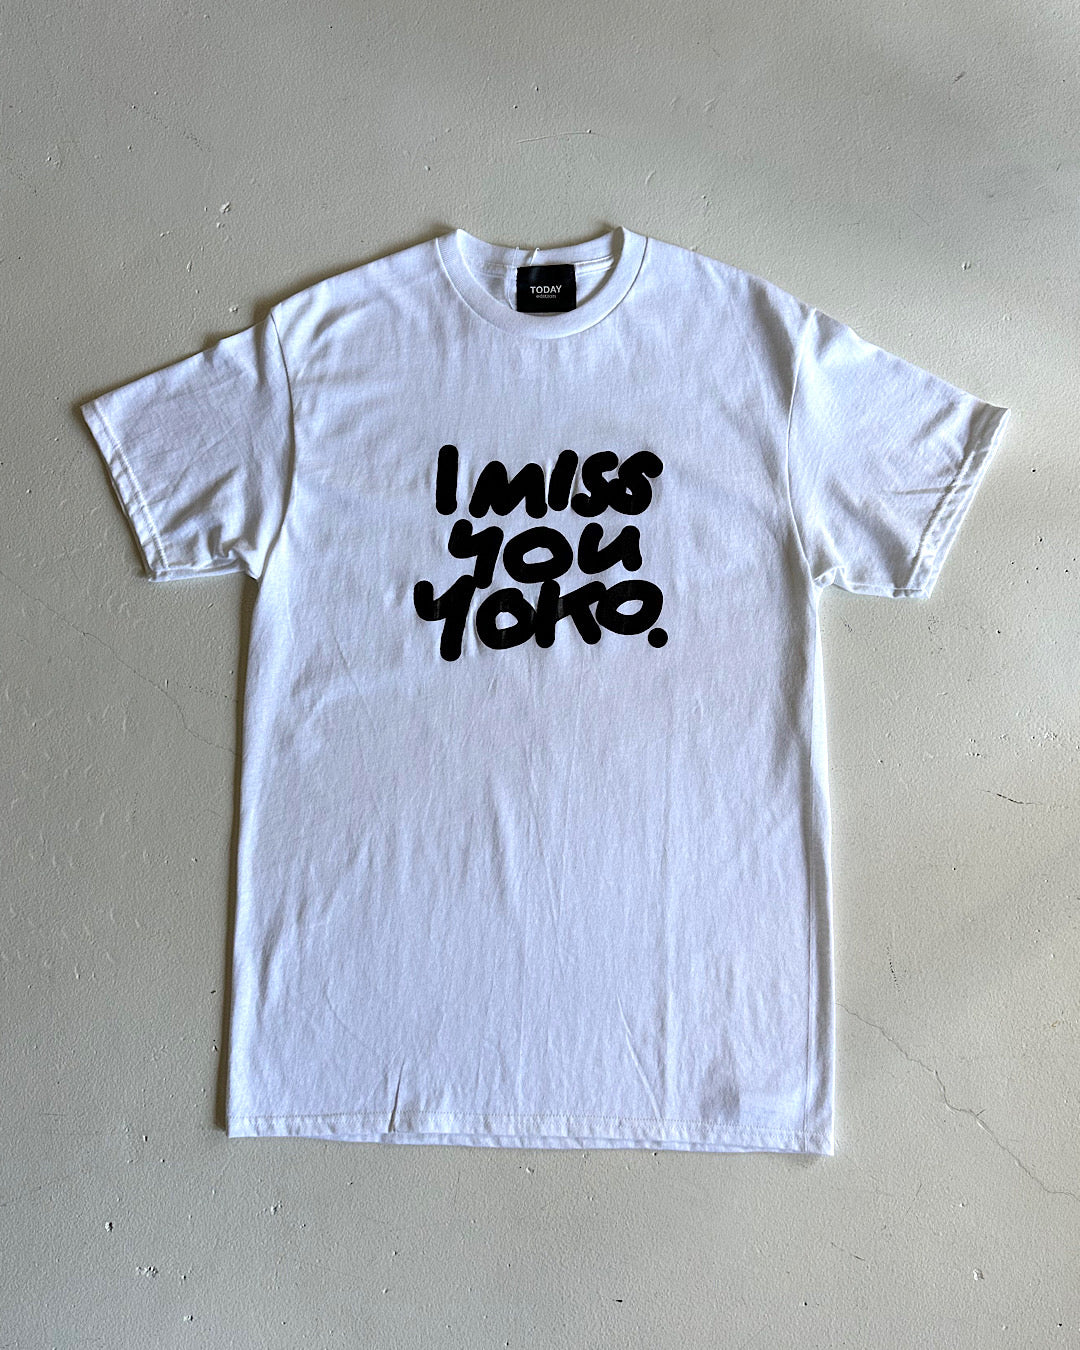 TODAY edition / I miss you yoko SS Tee - WHITE